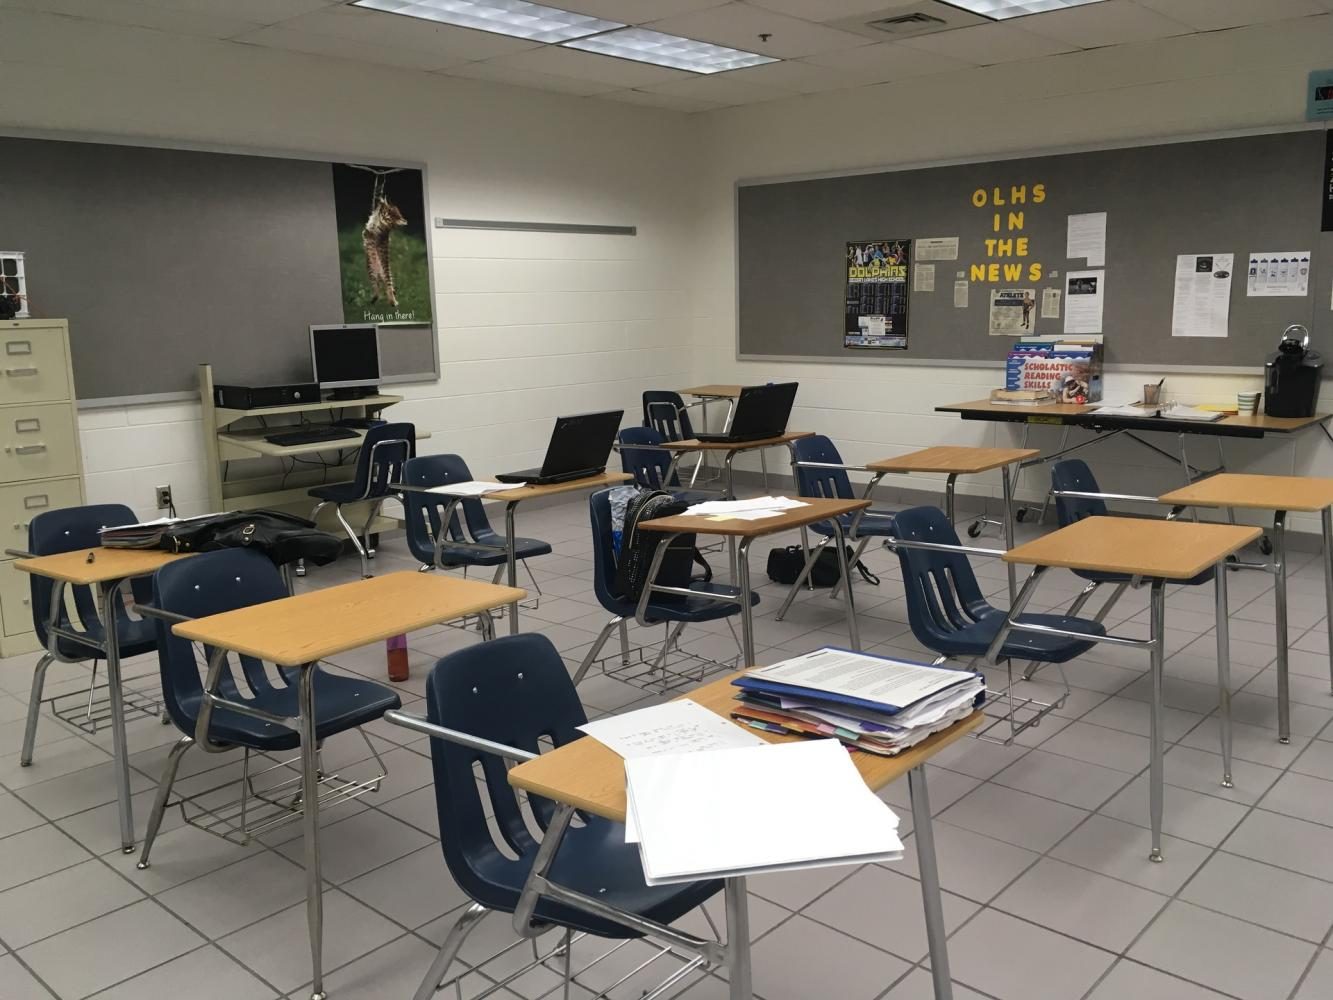 The I.S.S. room, where students sit for 3 hours after their 5th tardy